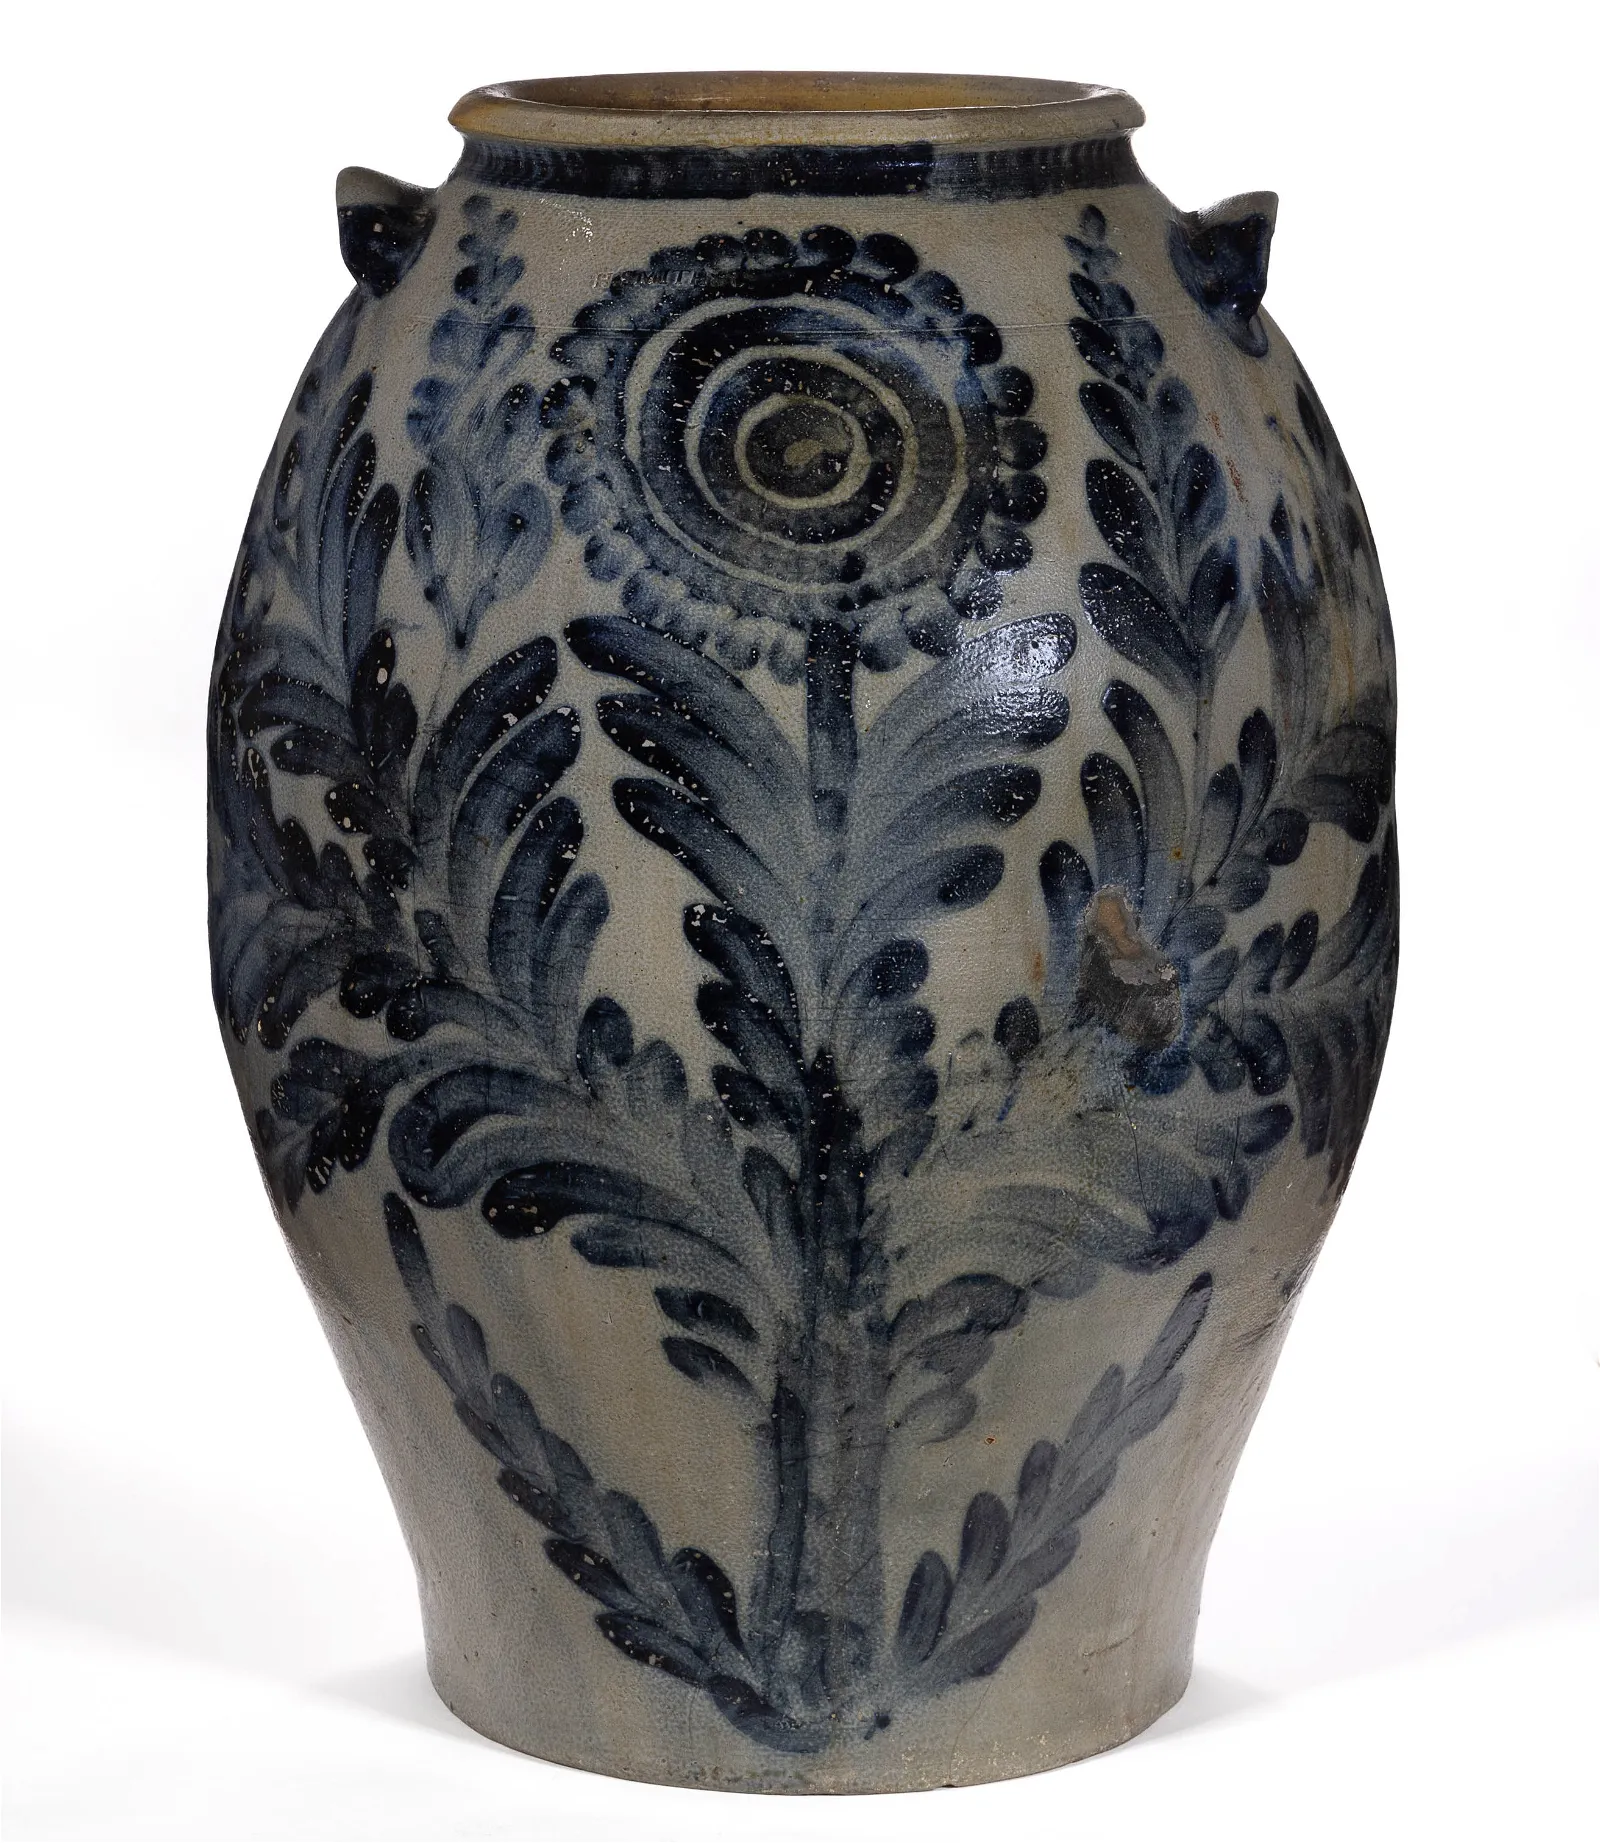 Stoneware jug attributed to African American potter David Jarbour is a top pick at Jeffrey S. Evans Feb. 9